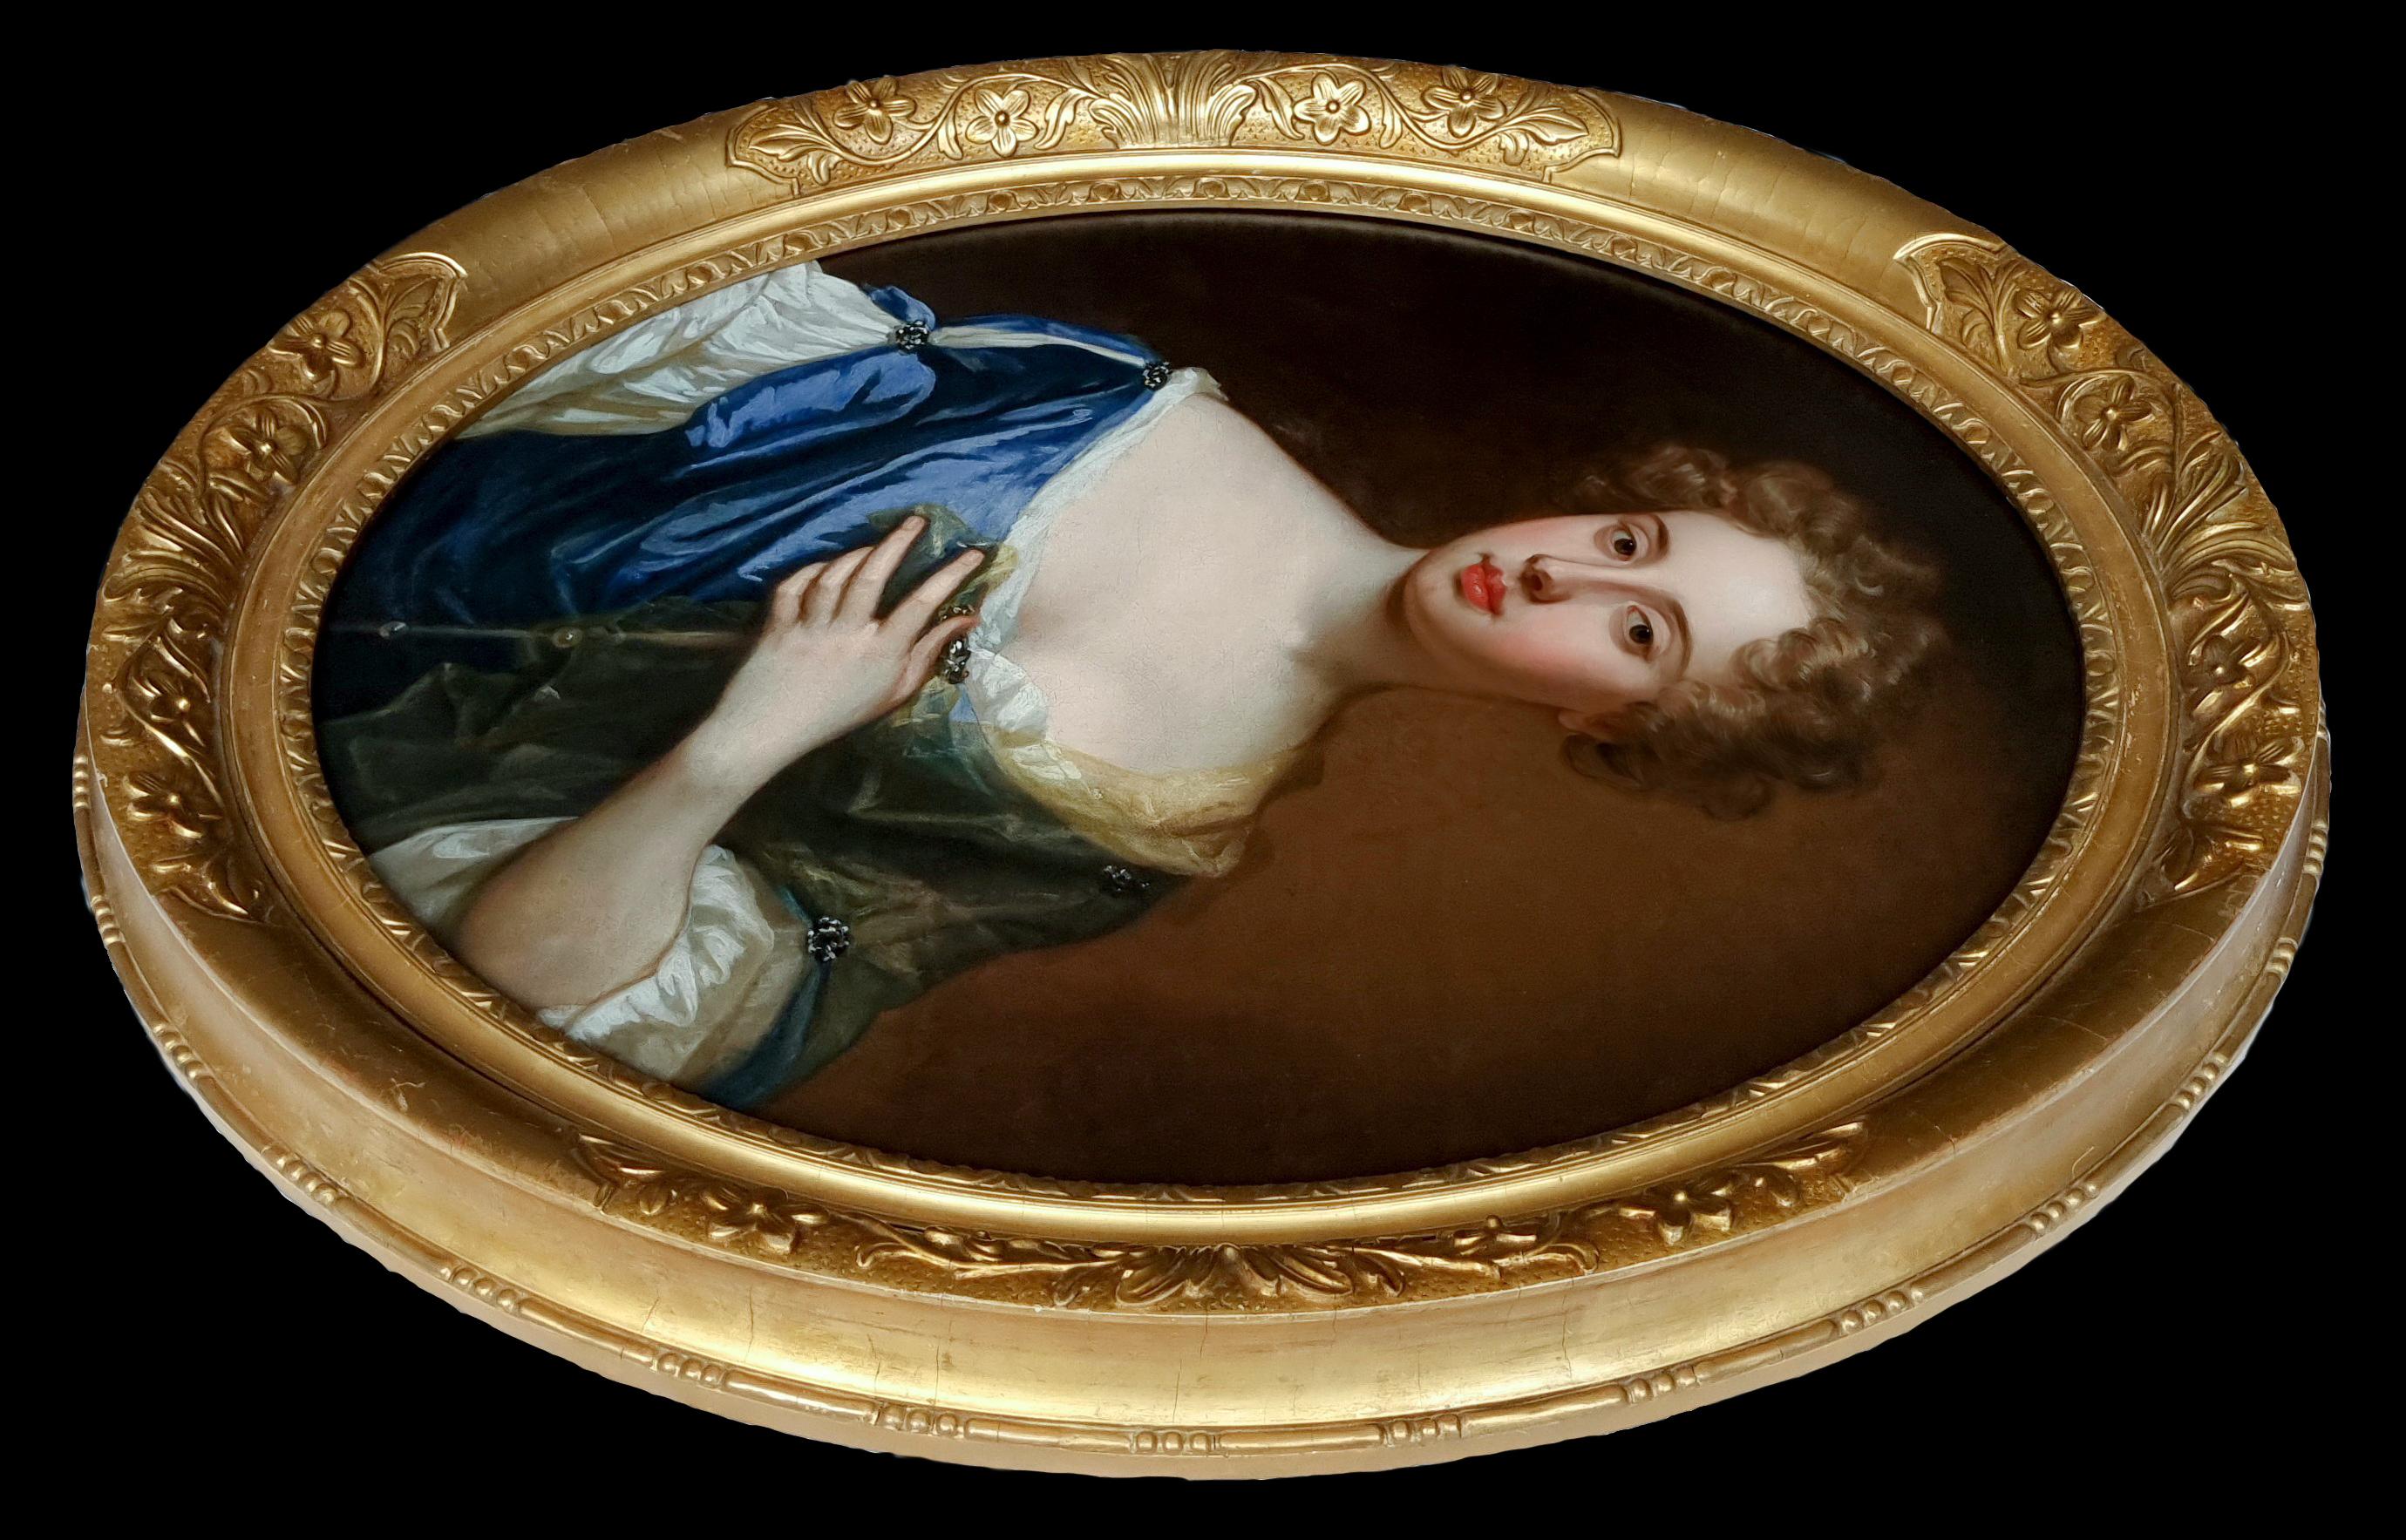 Portrait of a Lady in a Blue Gown Holding a Sheer Scarf c.1675-85, Oil on canvas For Sale 5